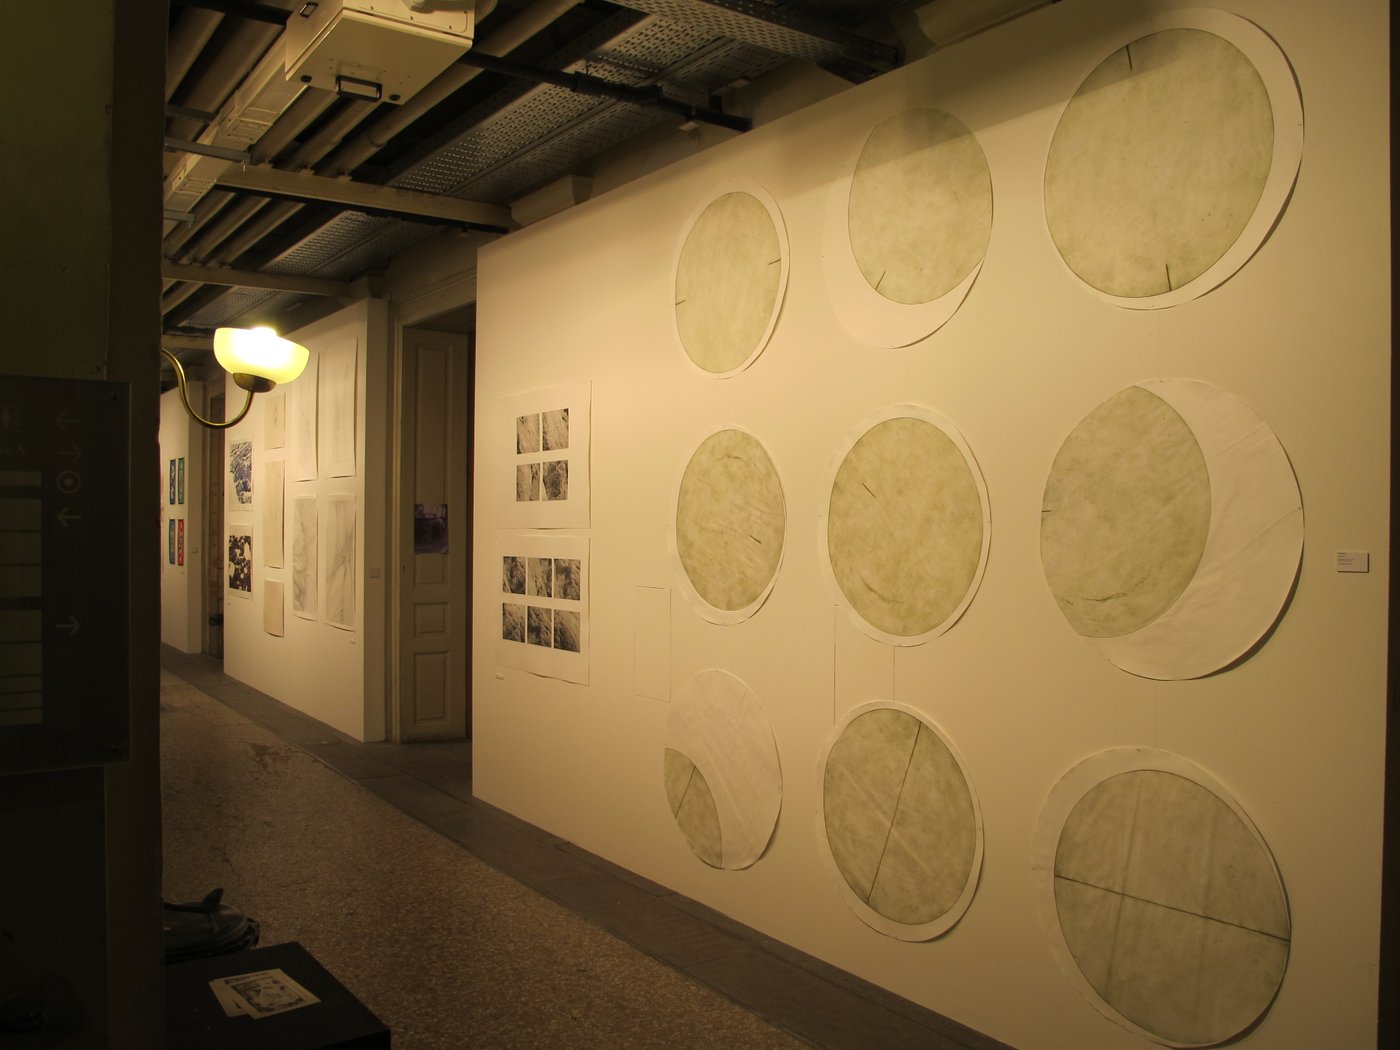 Paper works on a wall in the corridor